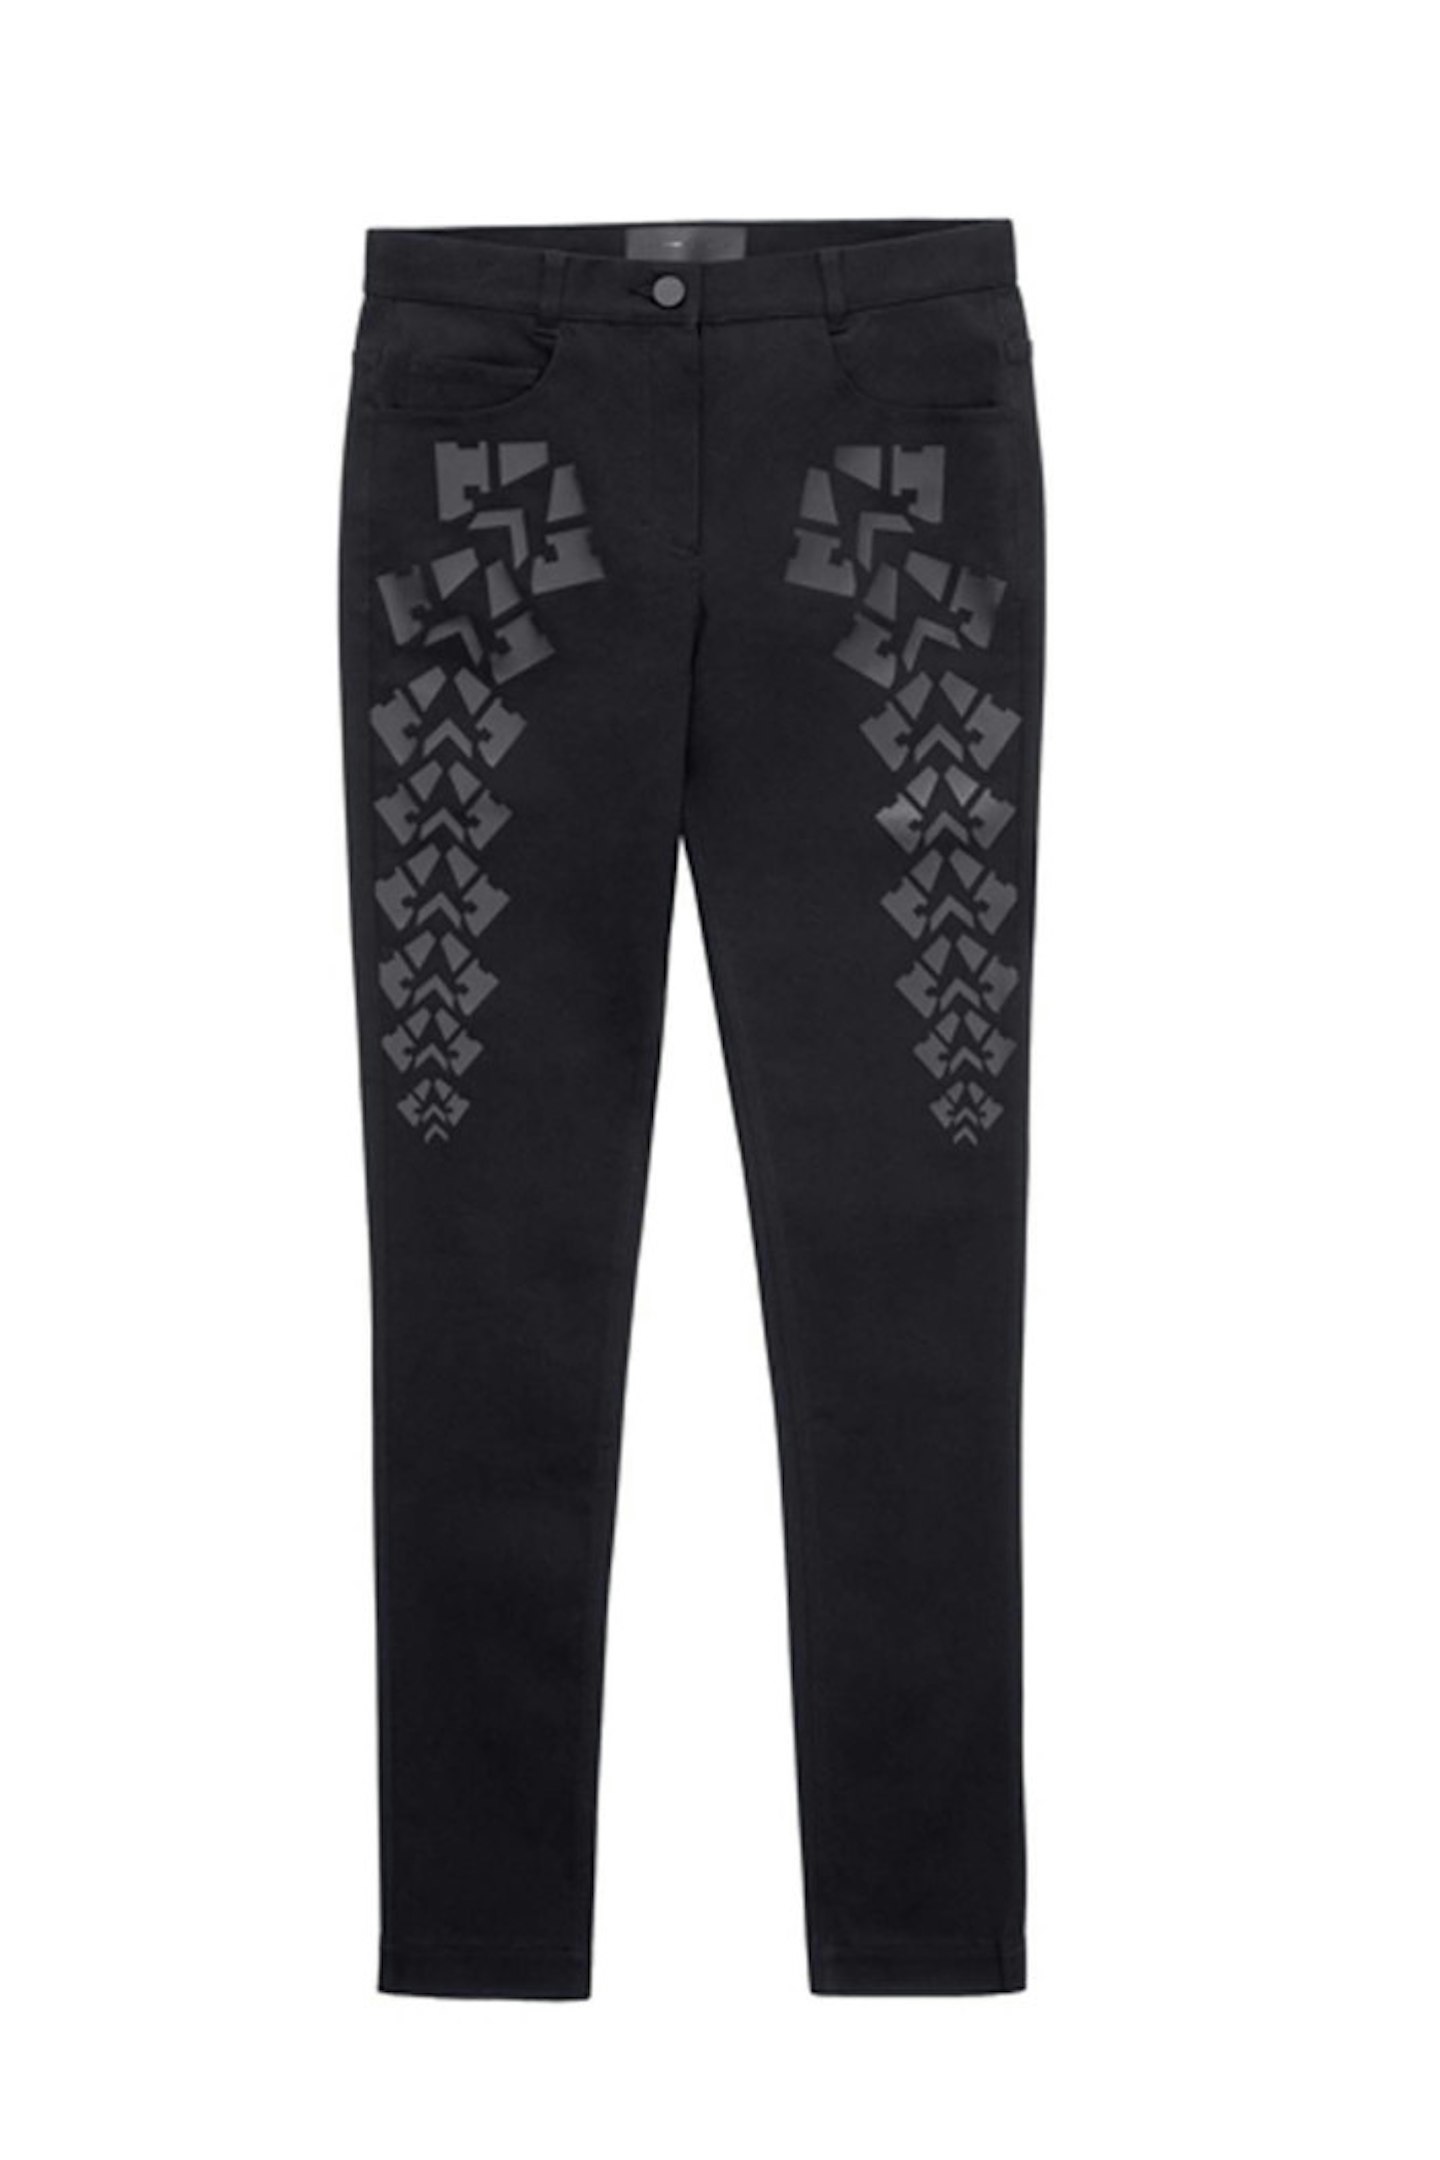 Printed jeans £59.99 by Alexander Wang x H&M